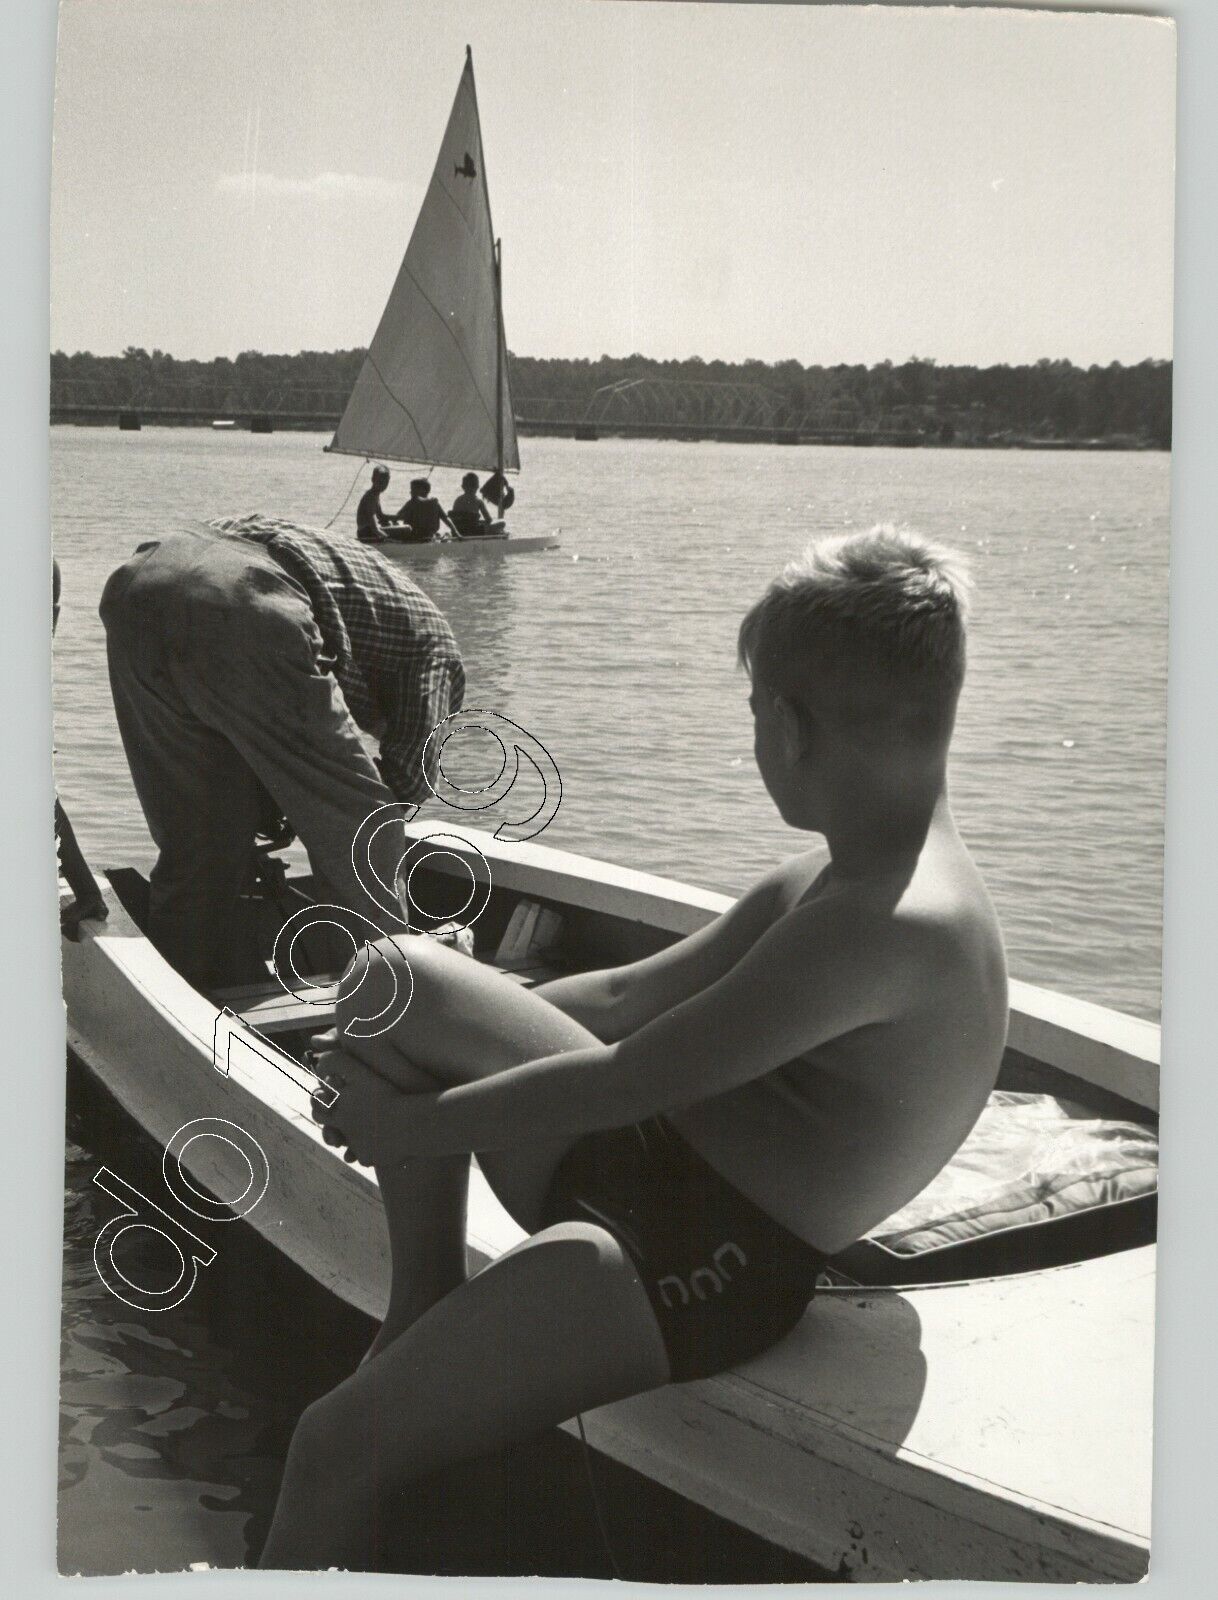 SWEET Image of Father & Son SAILING Together, USA 1950s ARTISTIC VTG PRESS PHOTO